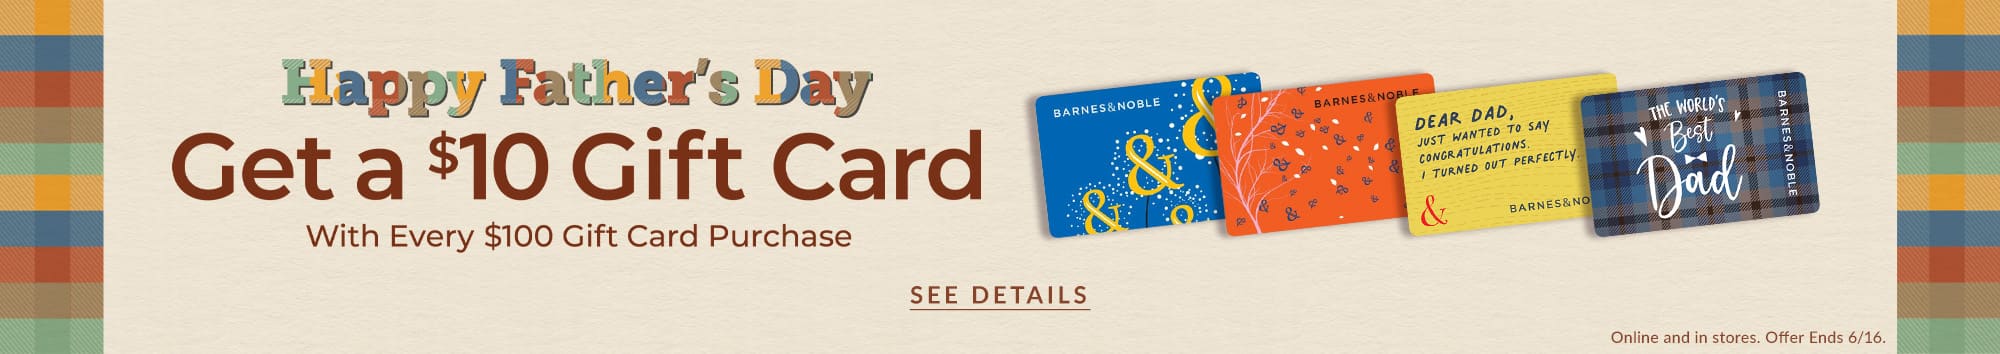 Happy Father's Day. Get a $10 Gift Card with every $100 gift cards purchase. See Details. Offer Ends 6/19